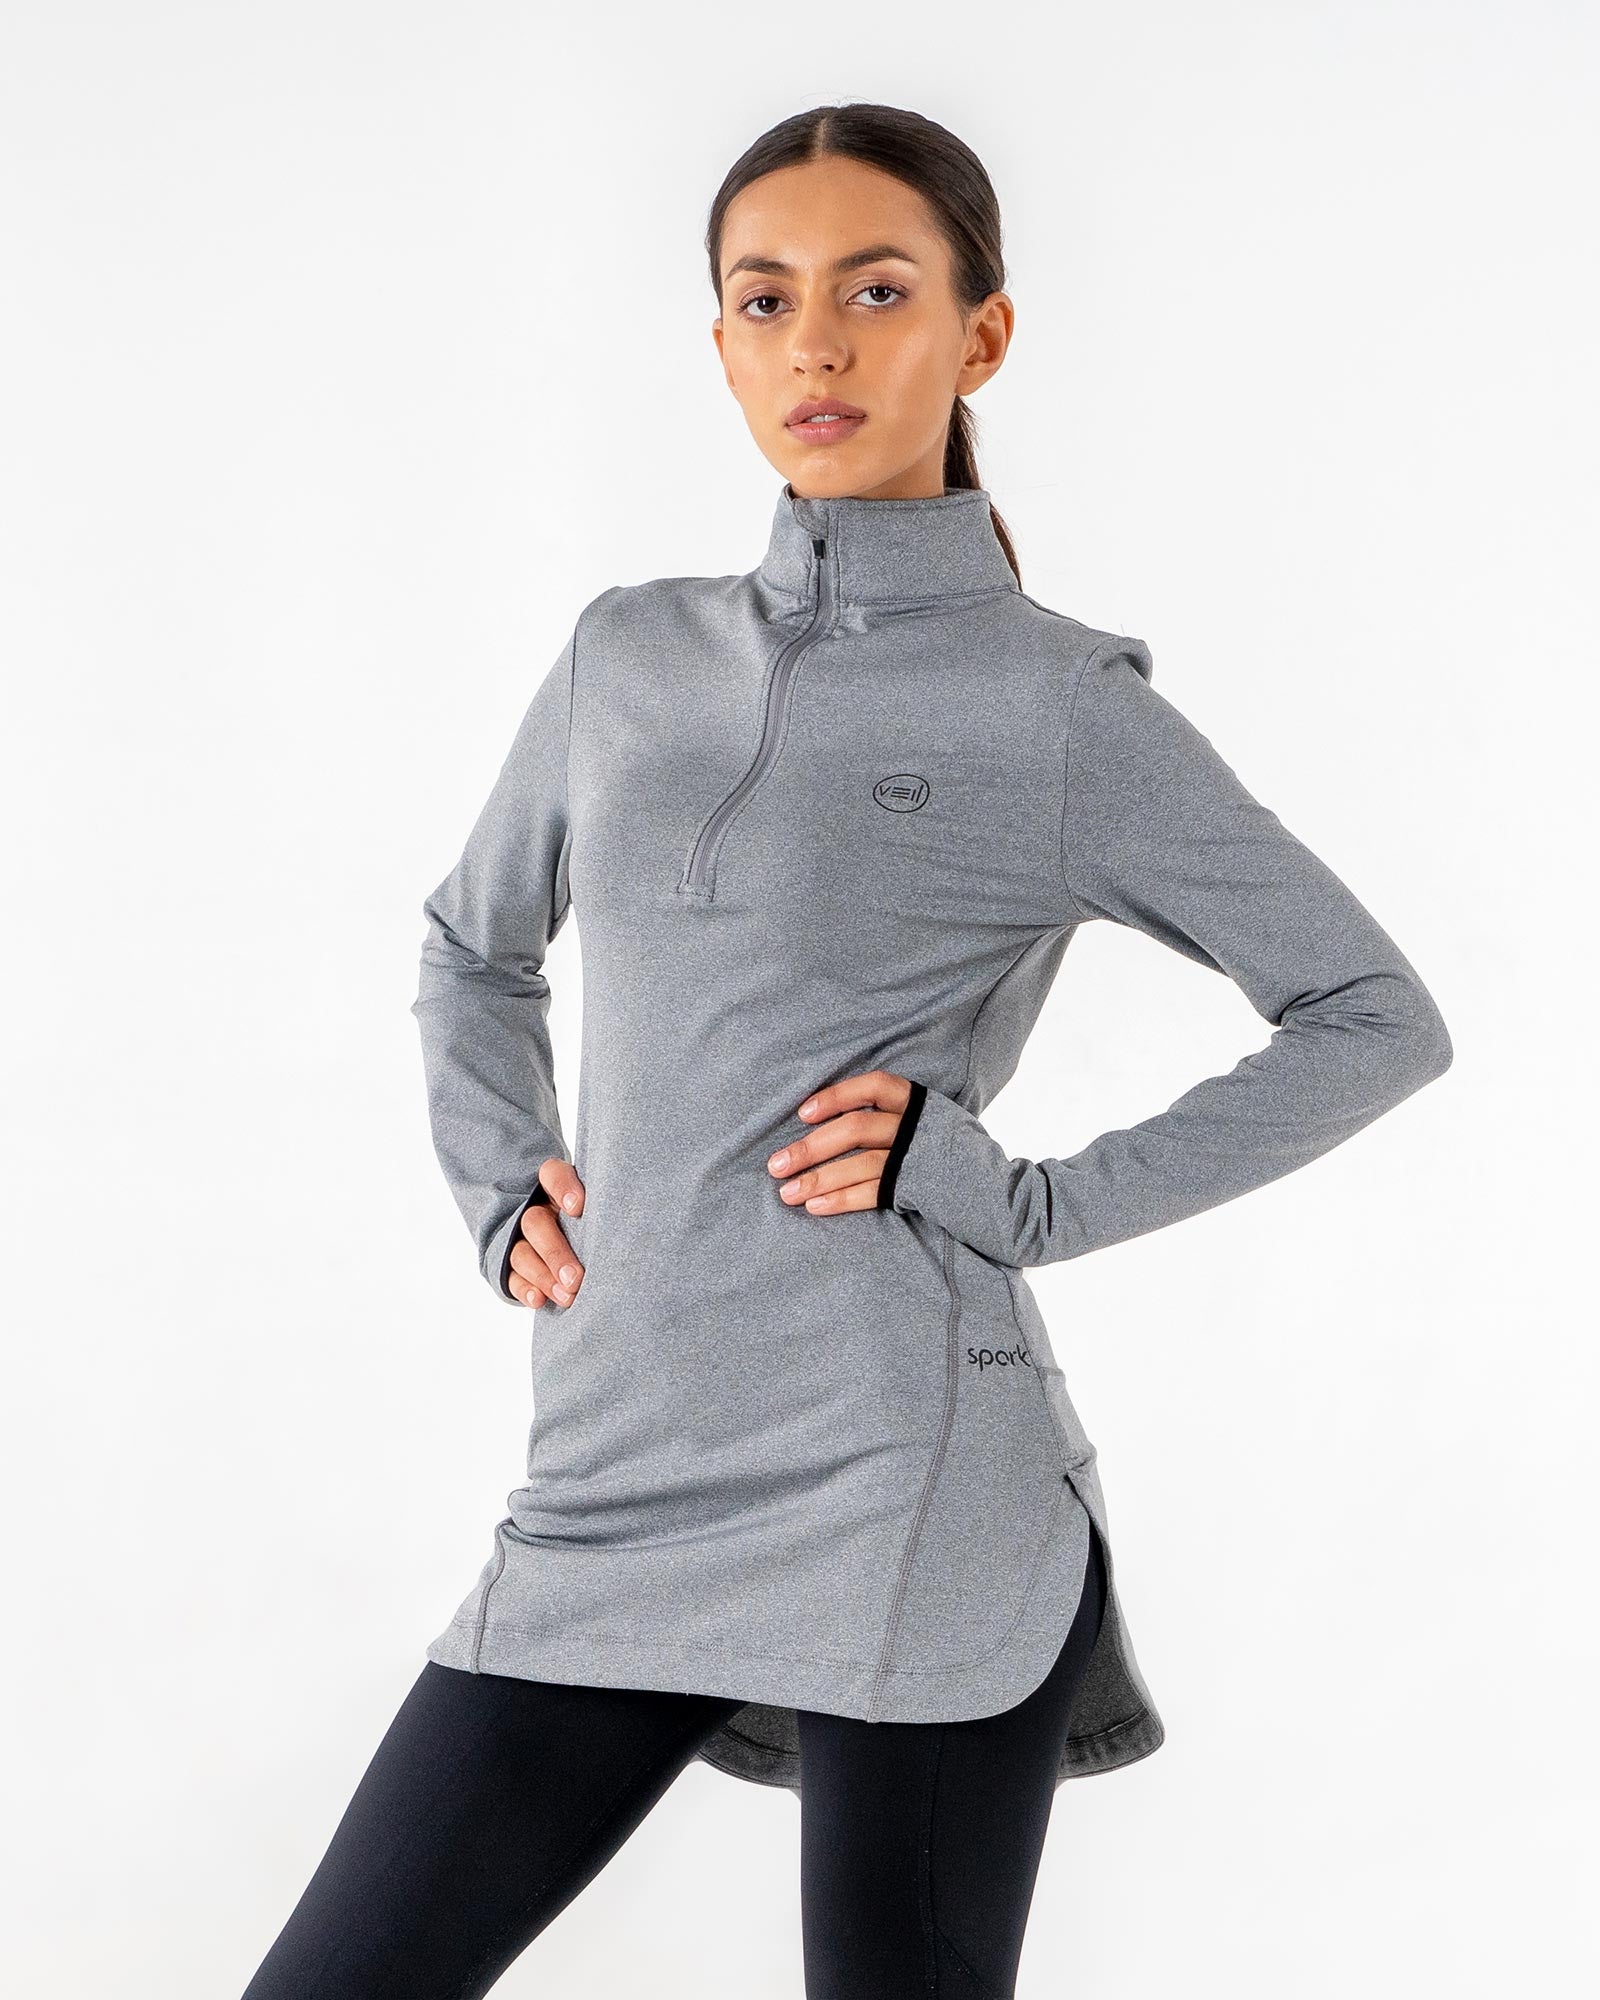 Spark Half-Zip in charcoal grey by Veil Garments. Modest activewear collection.